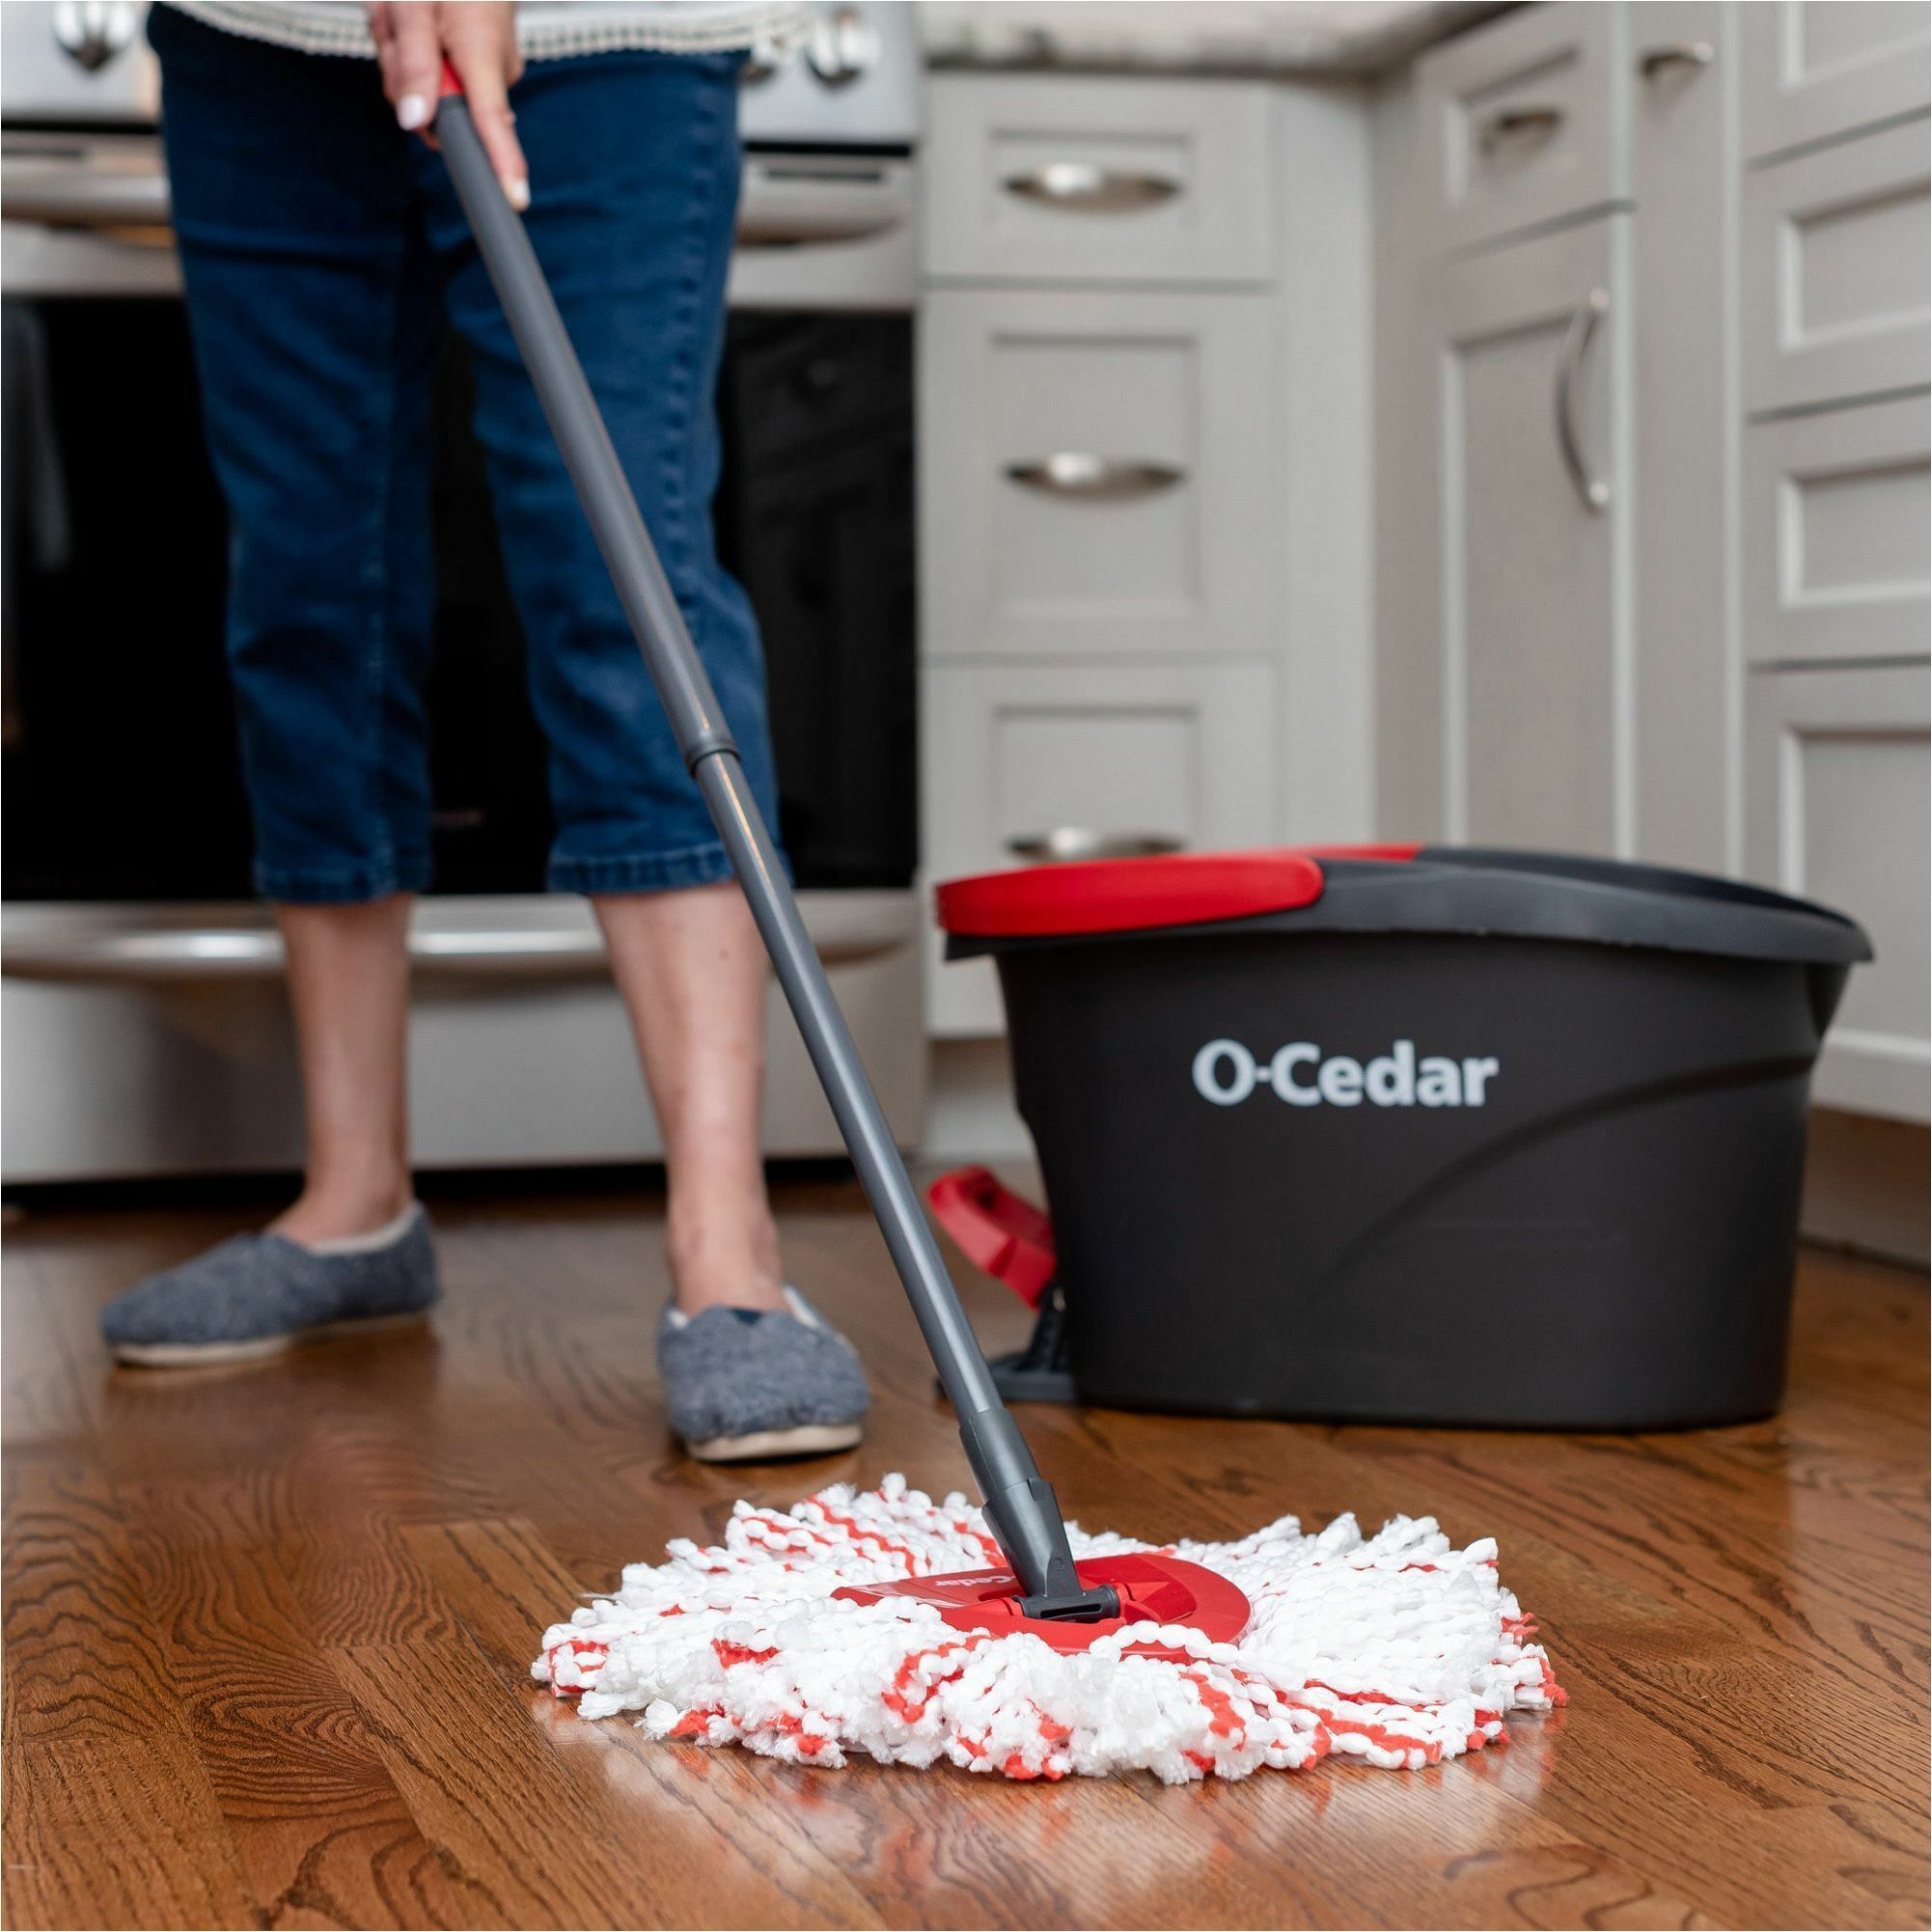 O-Cedar EasyWring Spin Mop & Bucket System with 3 Refills